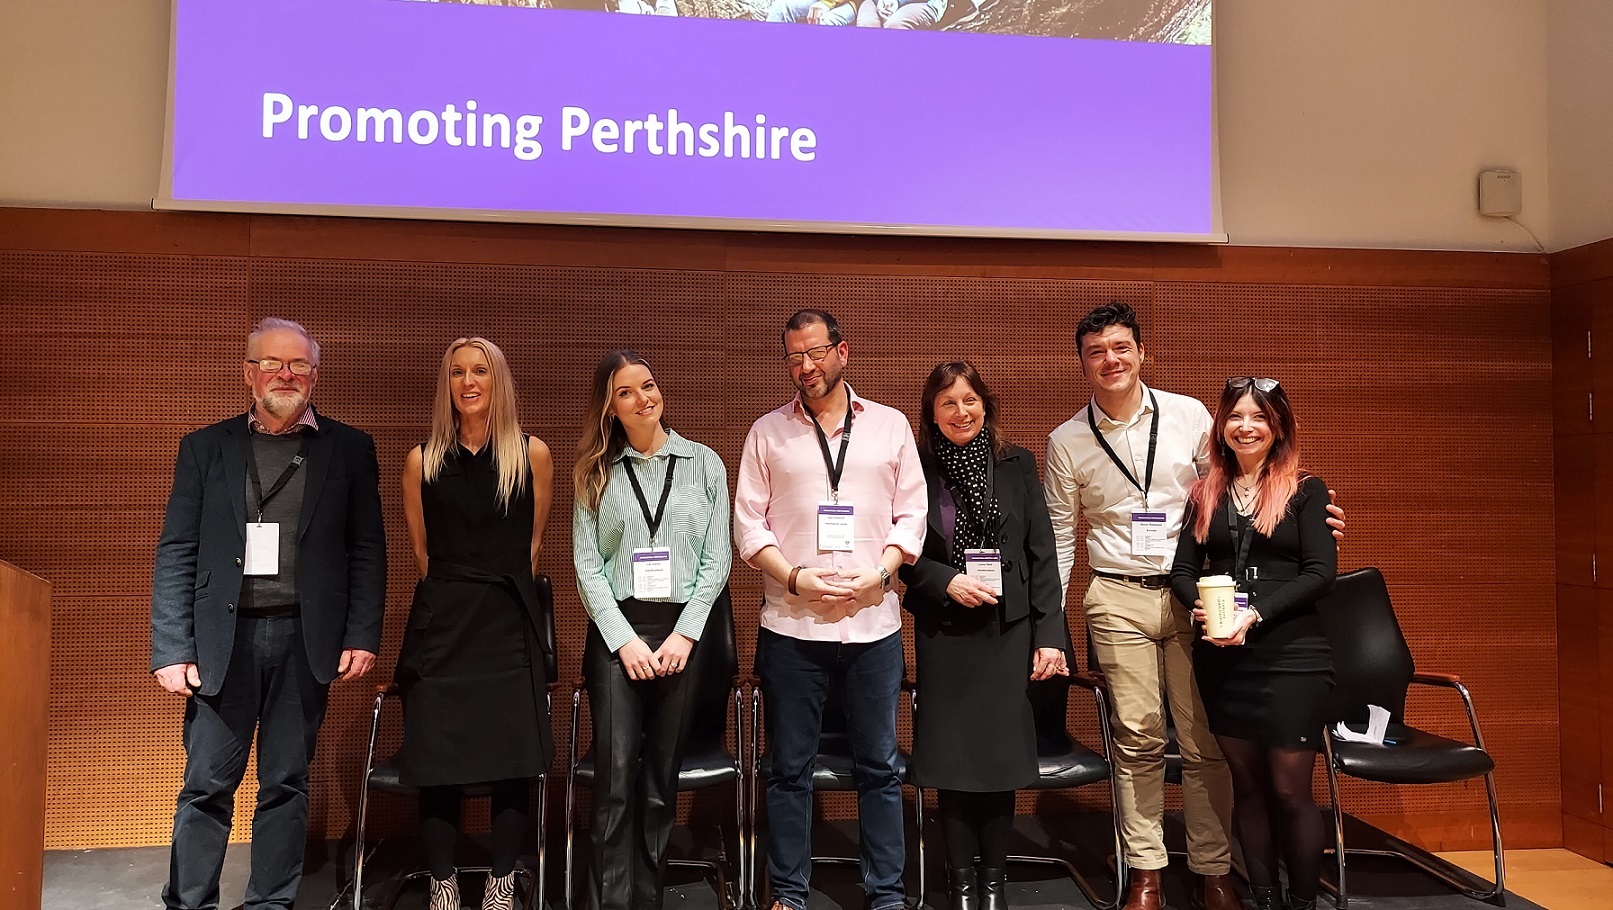 seven people standing in front of a large screen which reads "promoting Perthshire"